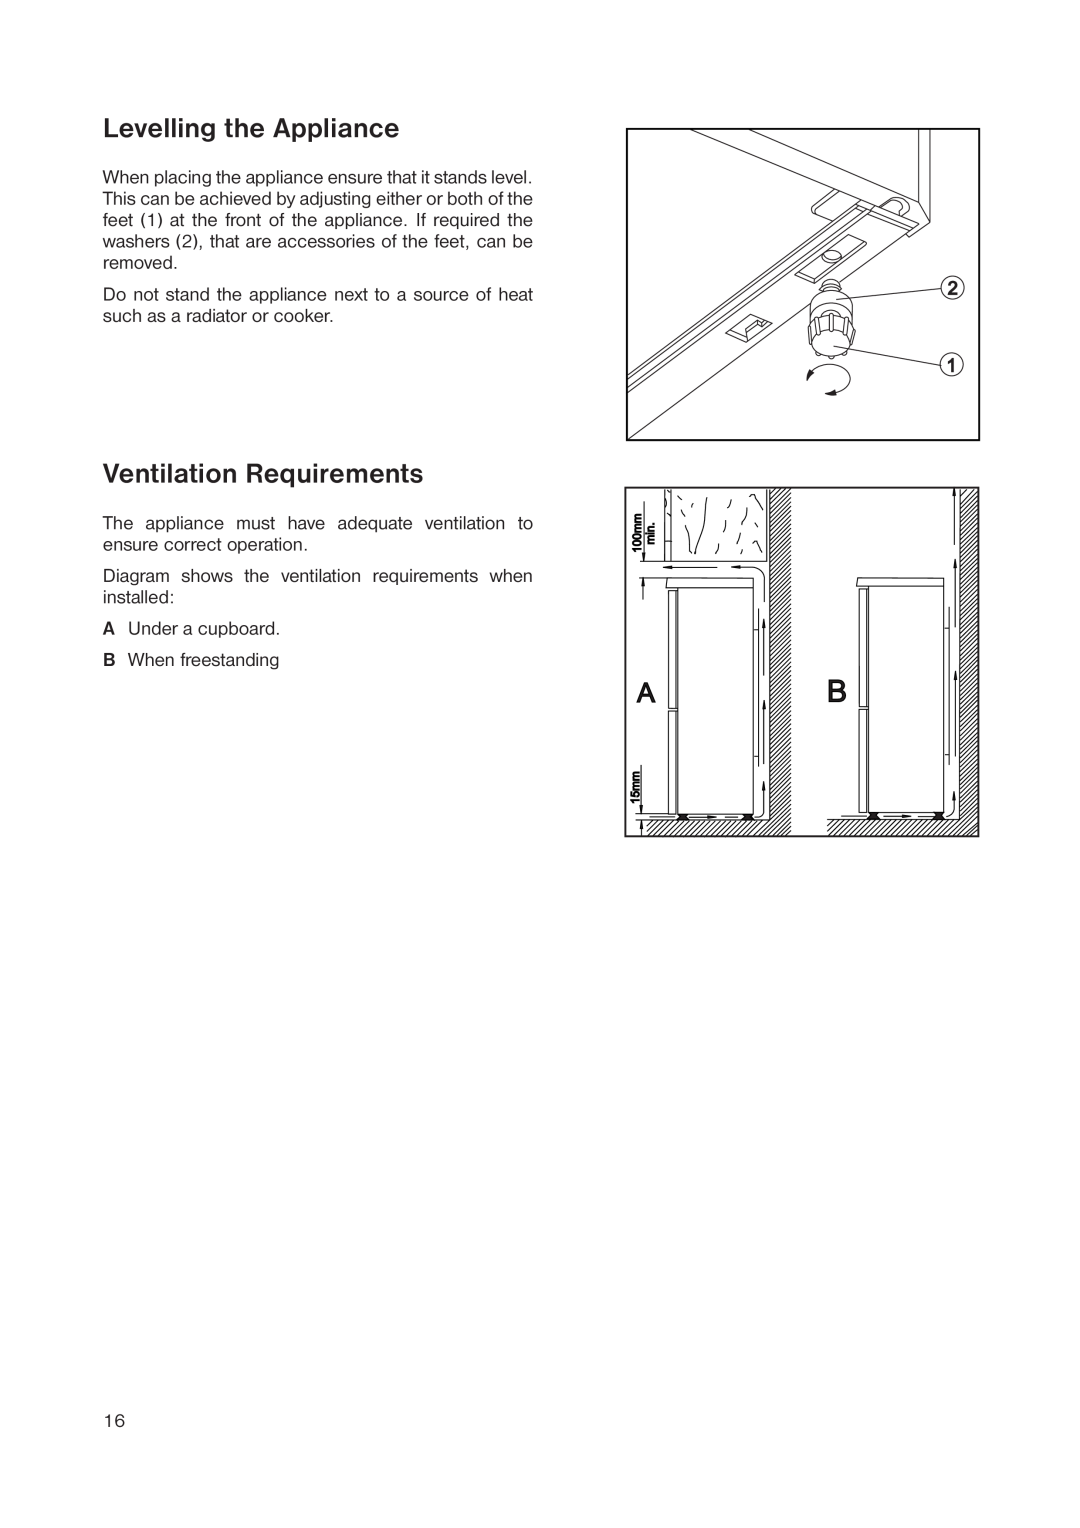 Zanussi ZRB 3041 manual Levelling the Appliance, Ventilation Requirements 